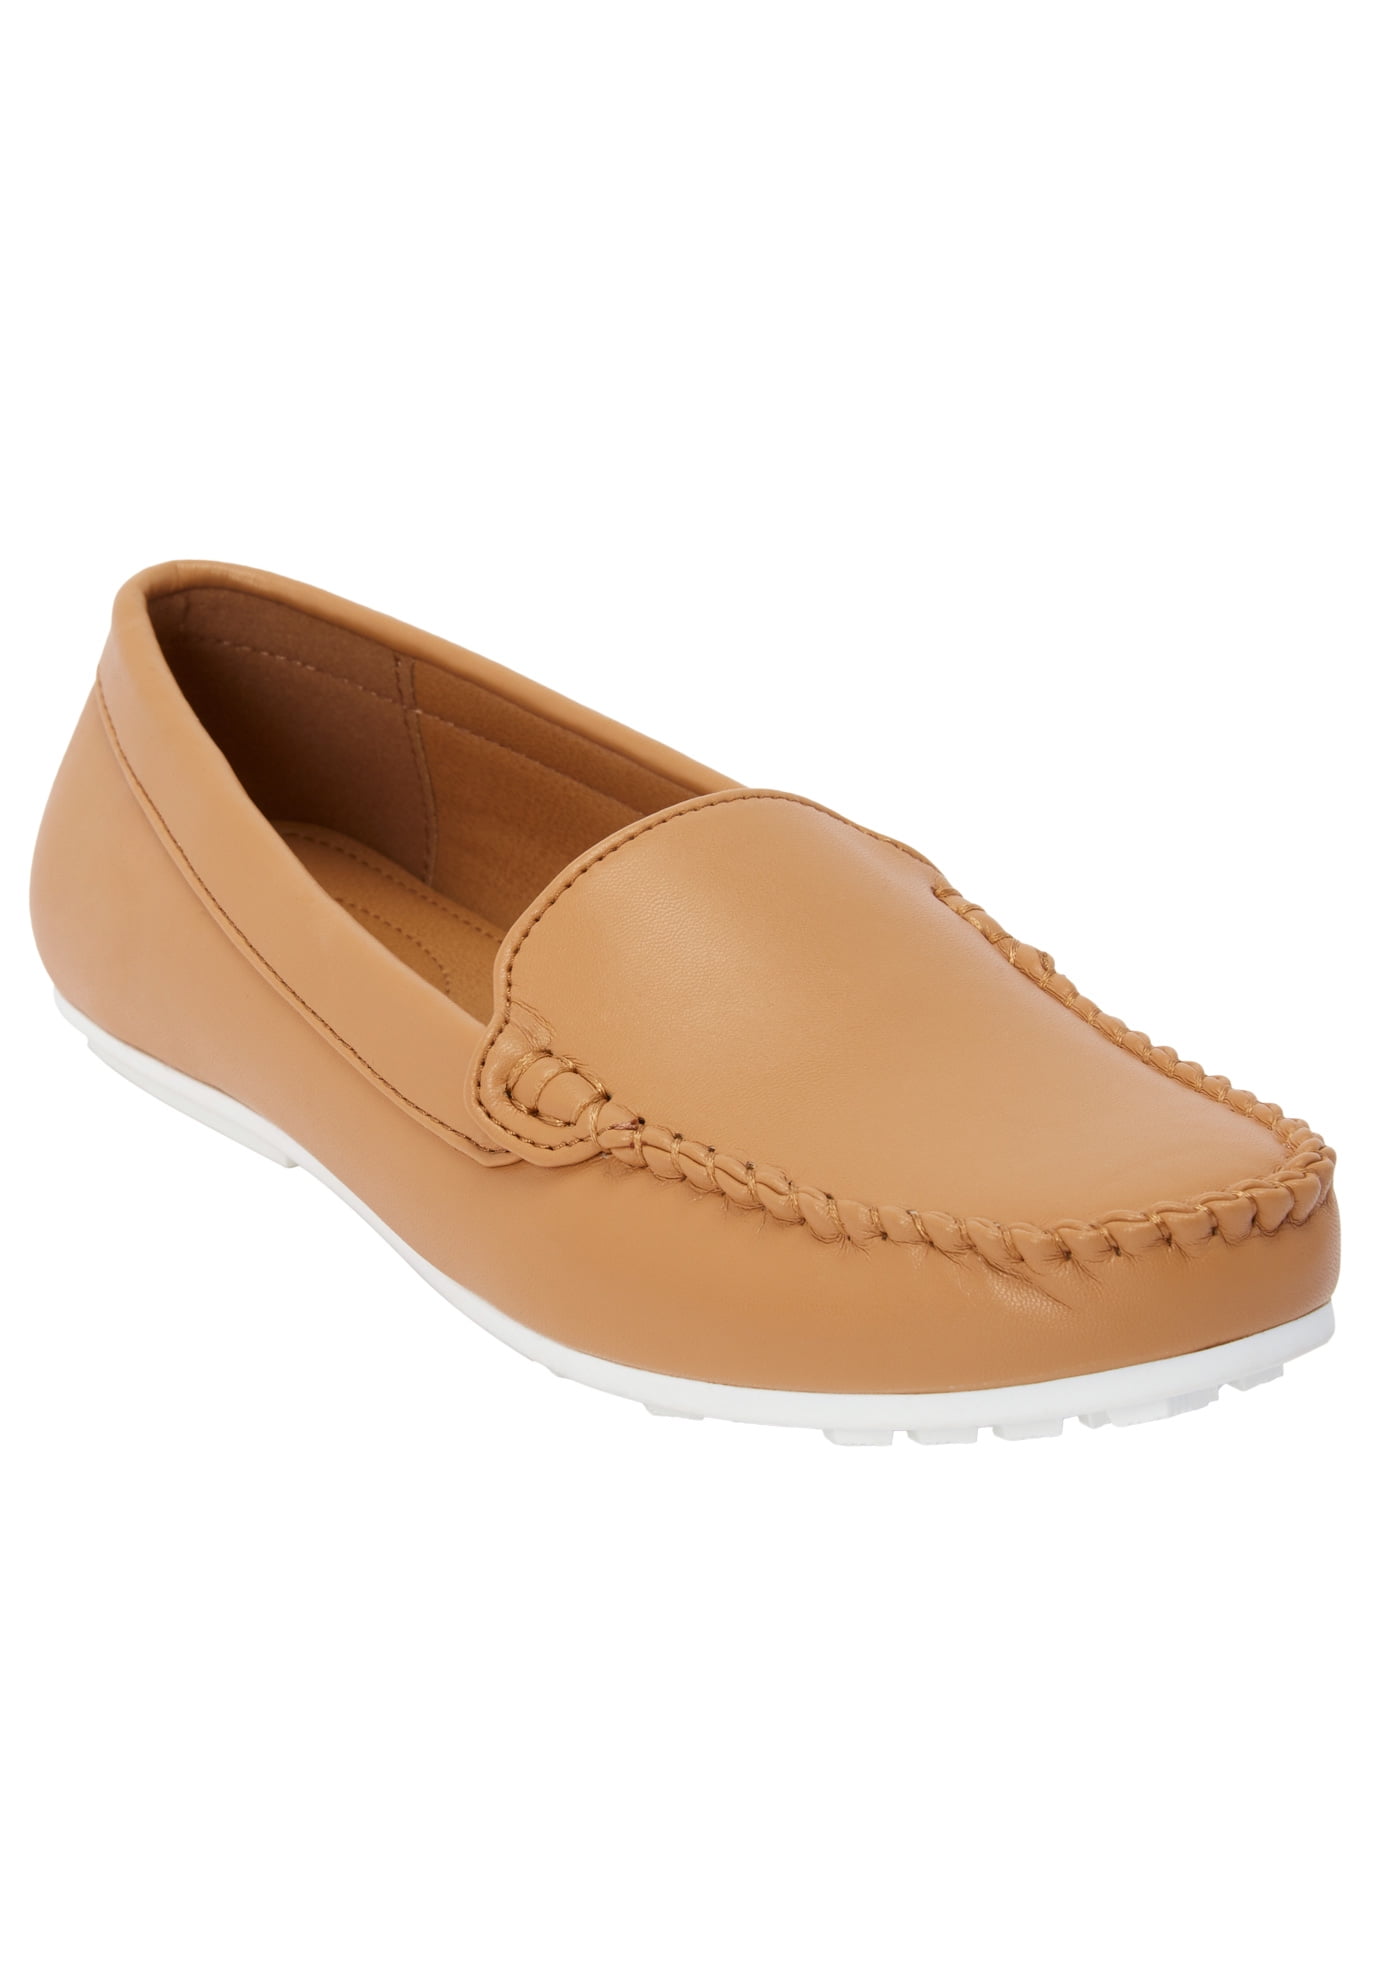 wide moccasin shoes